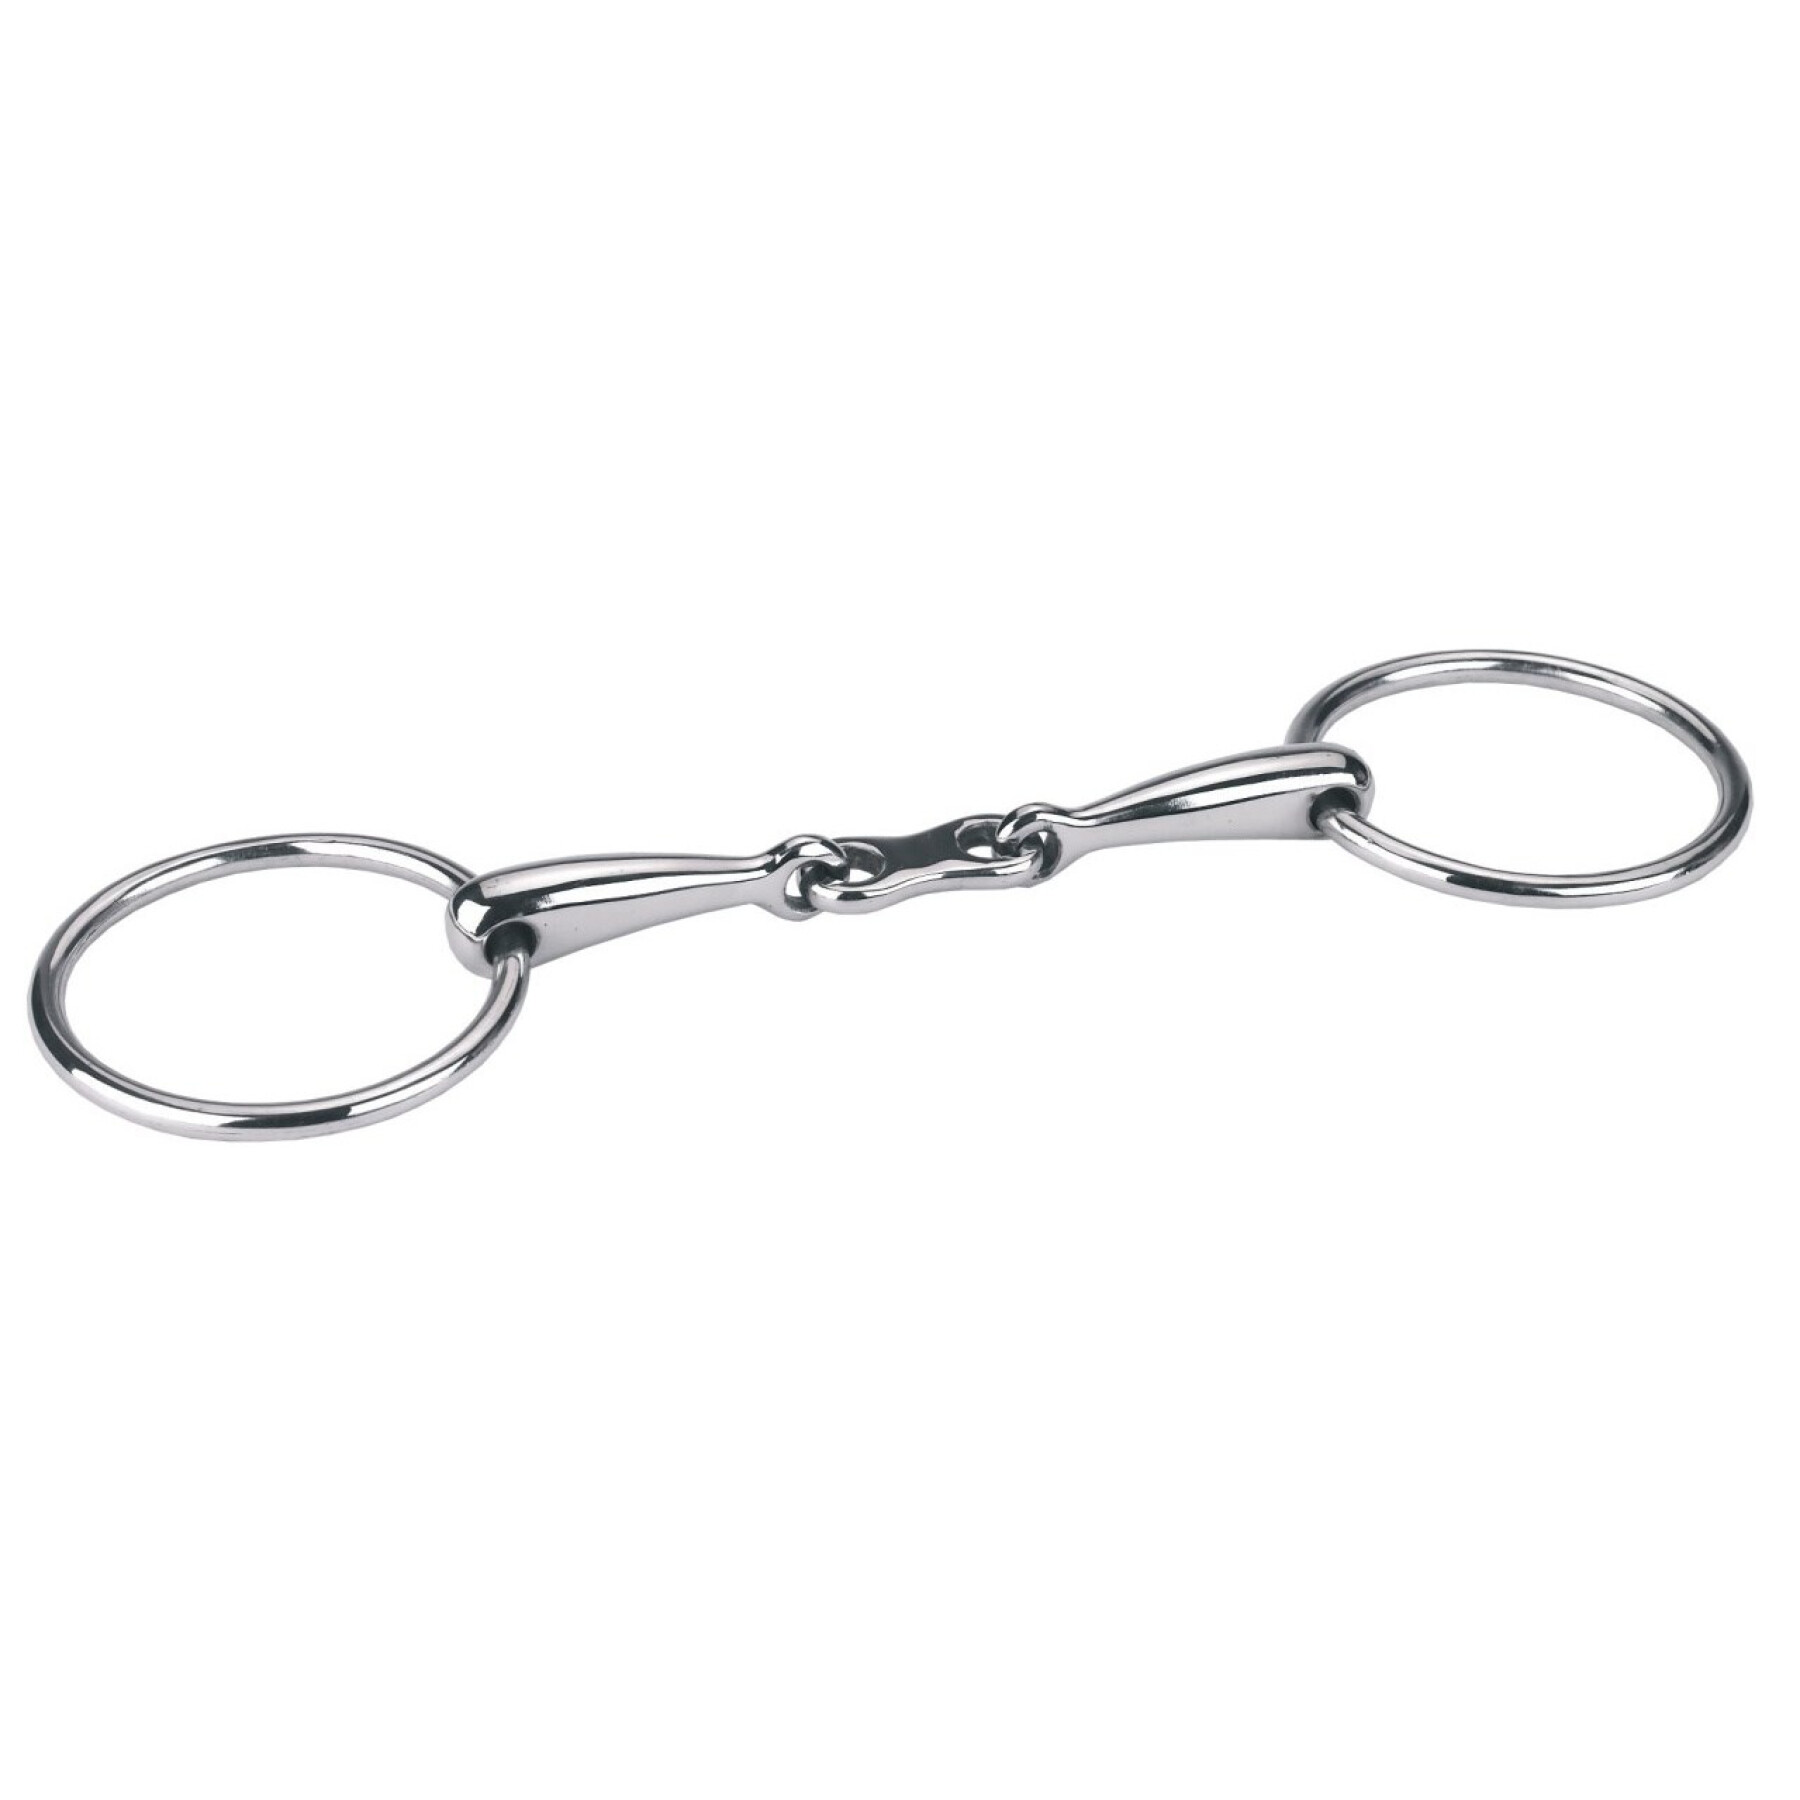 Double stainless steel horse bits Covalliero